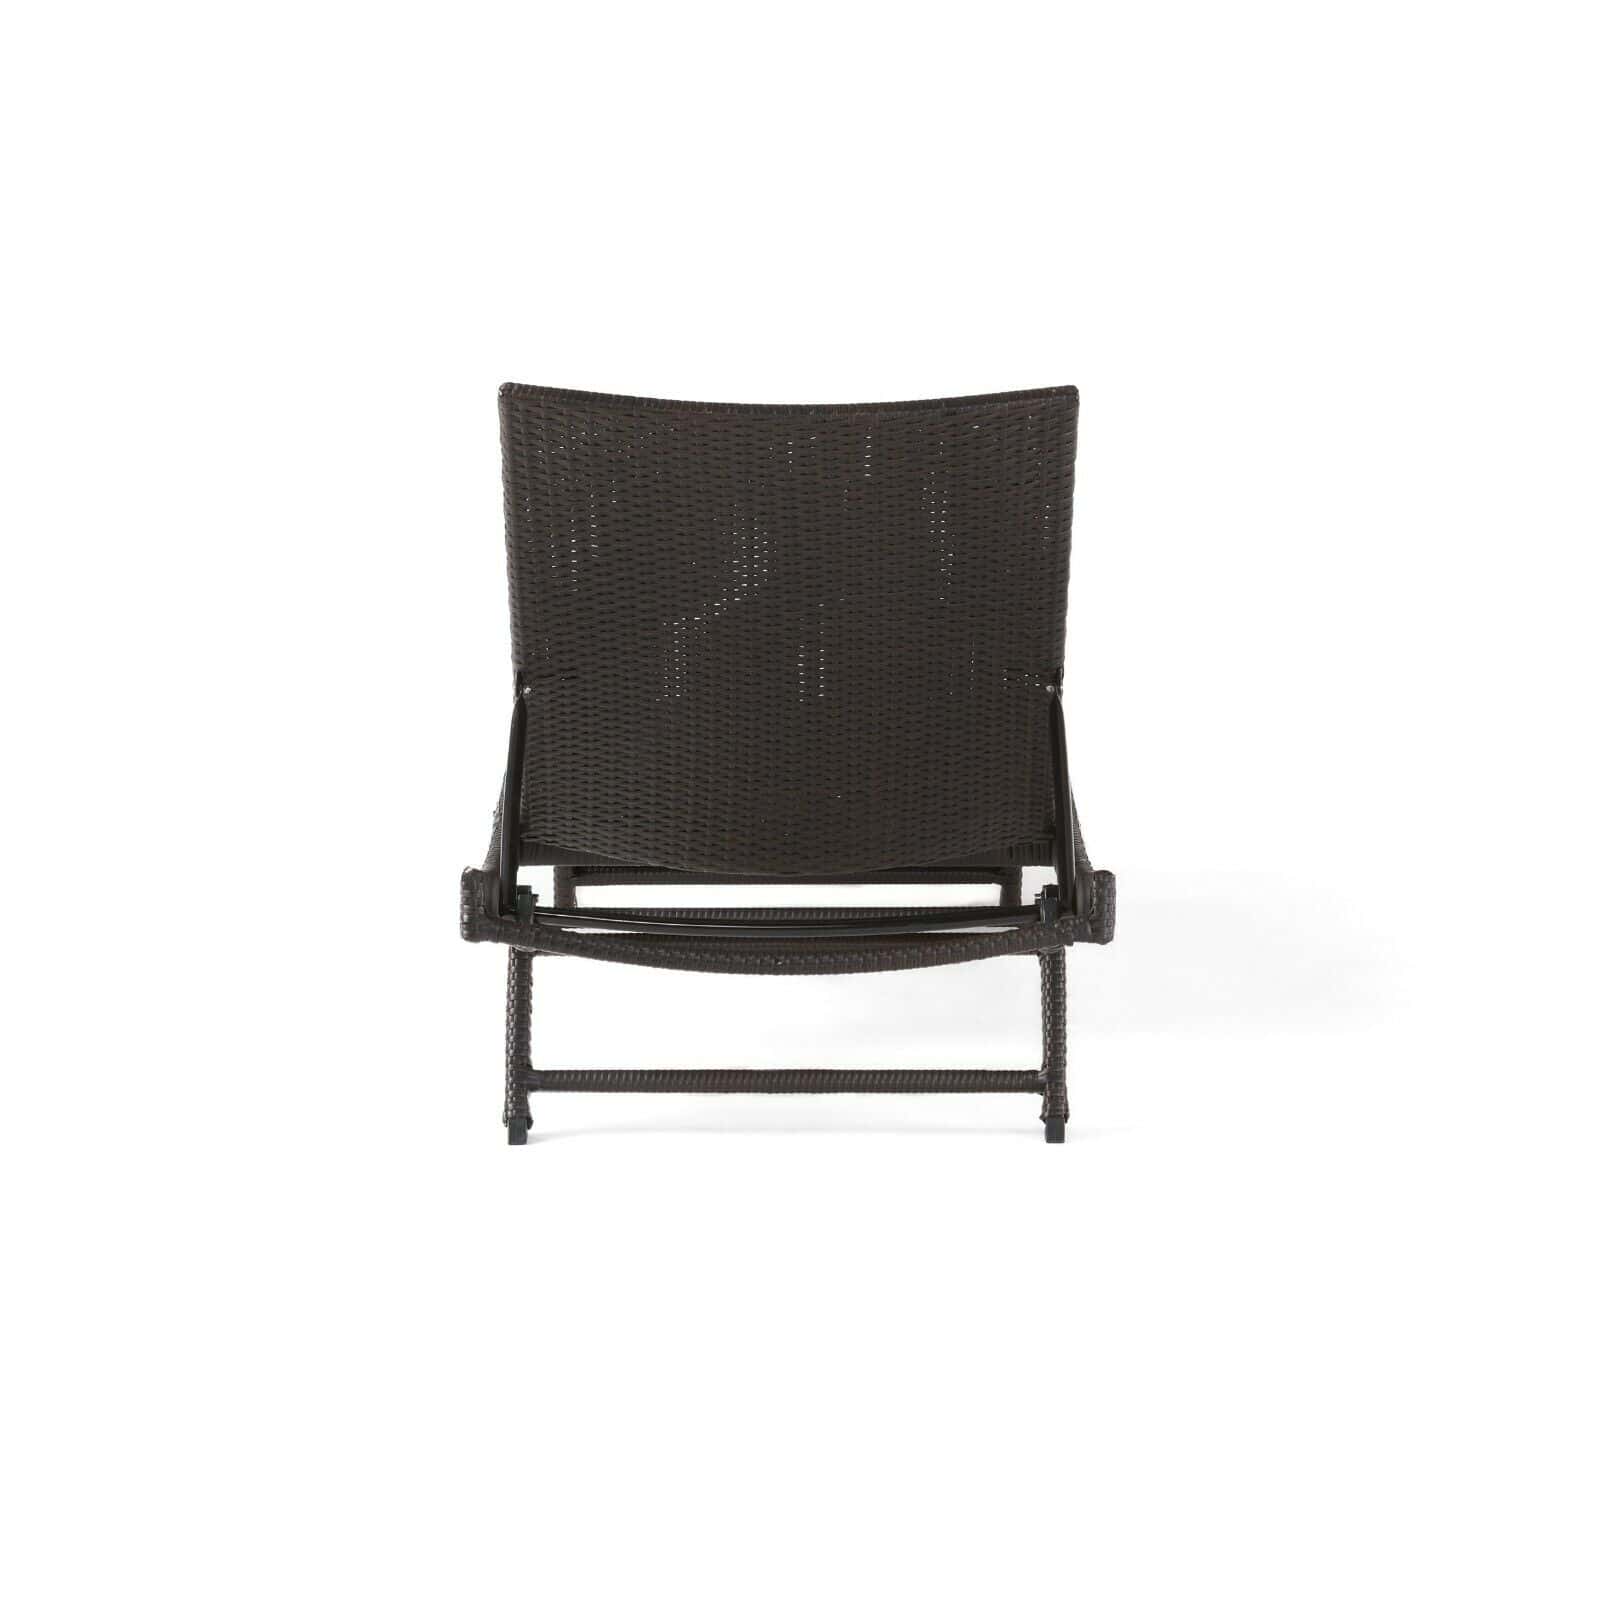 A black wicker lounge chair on a white background.